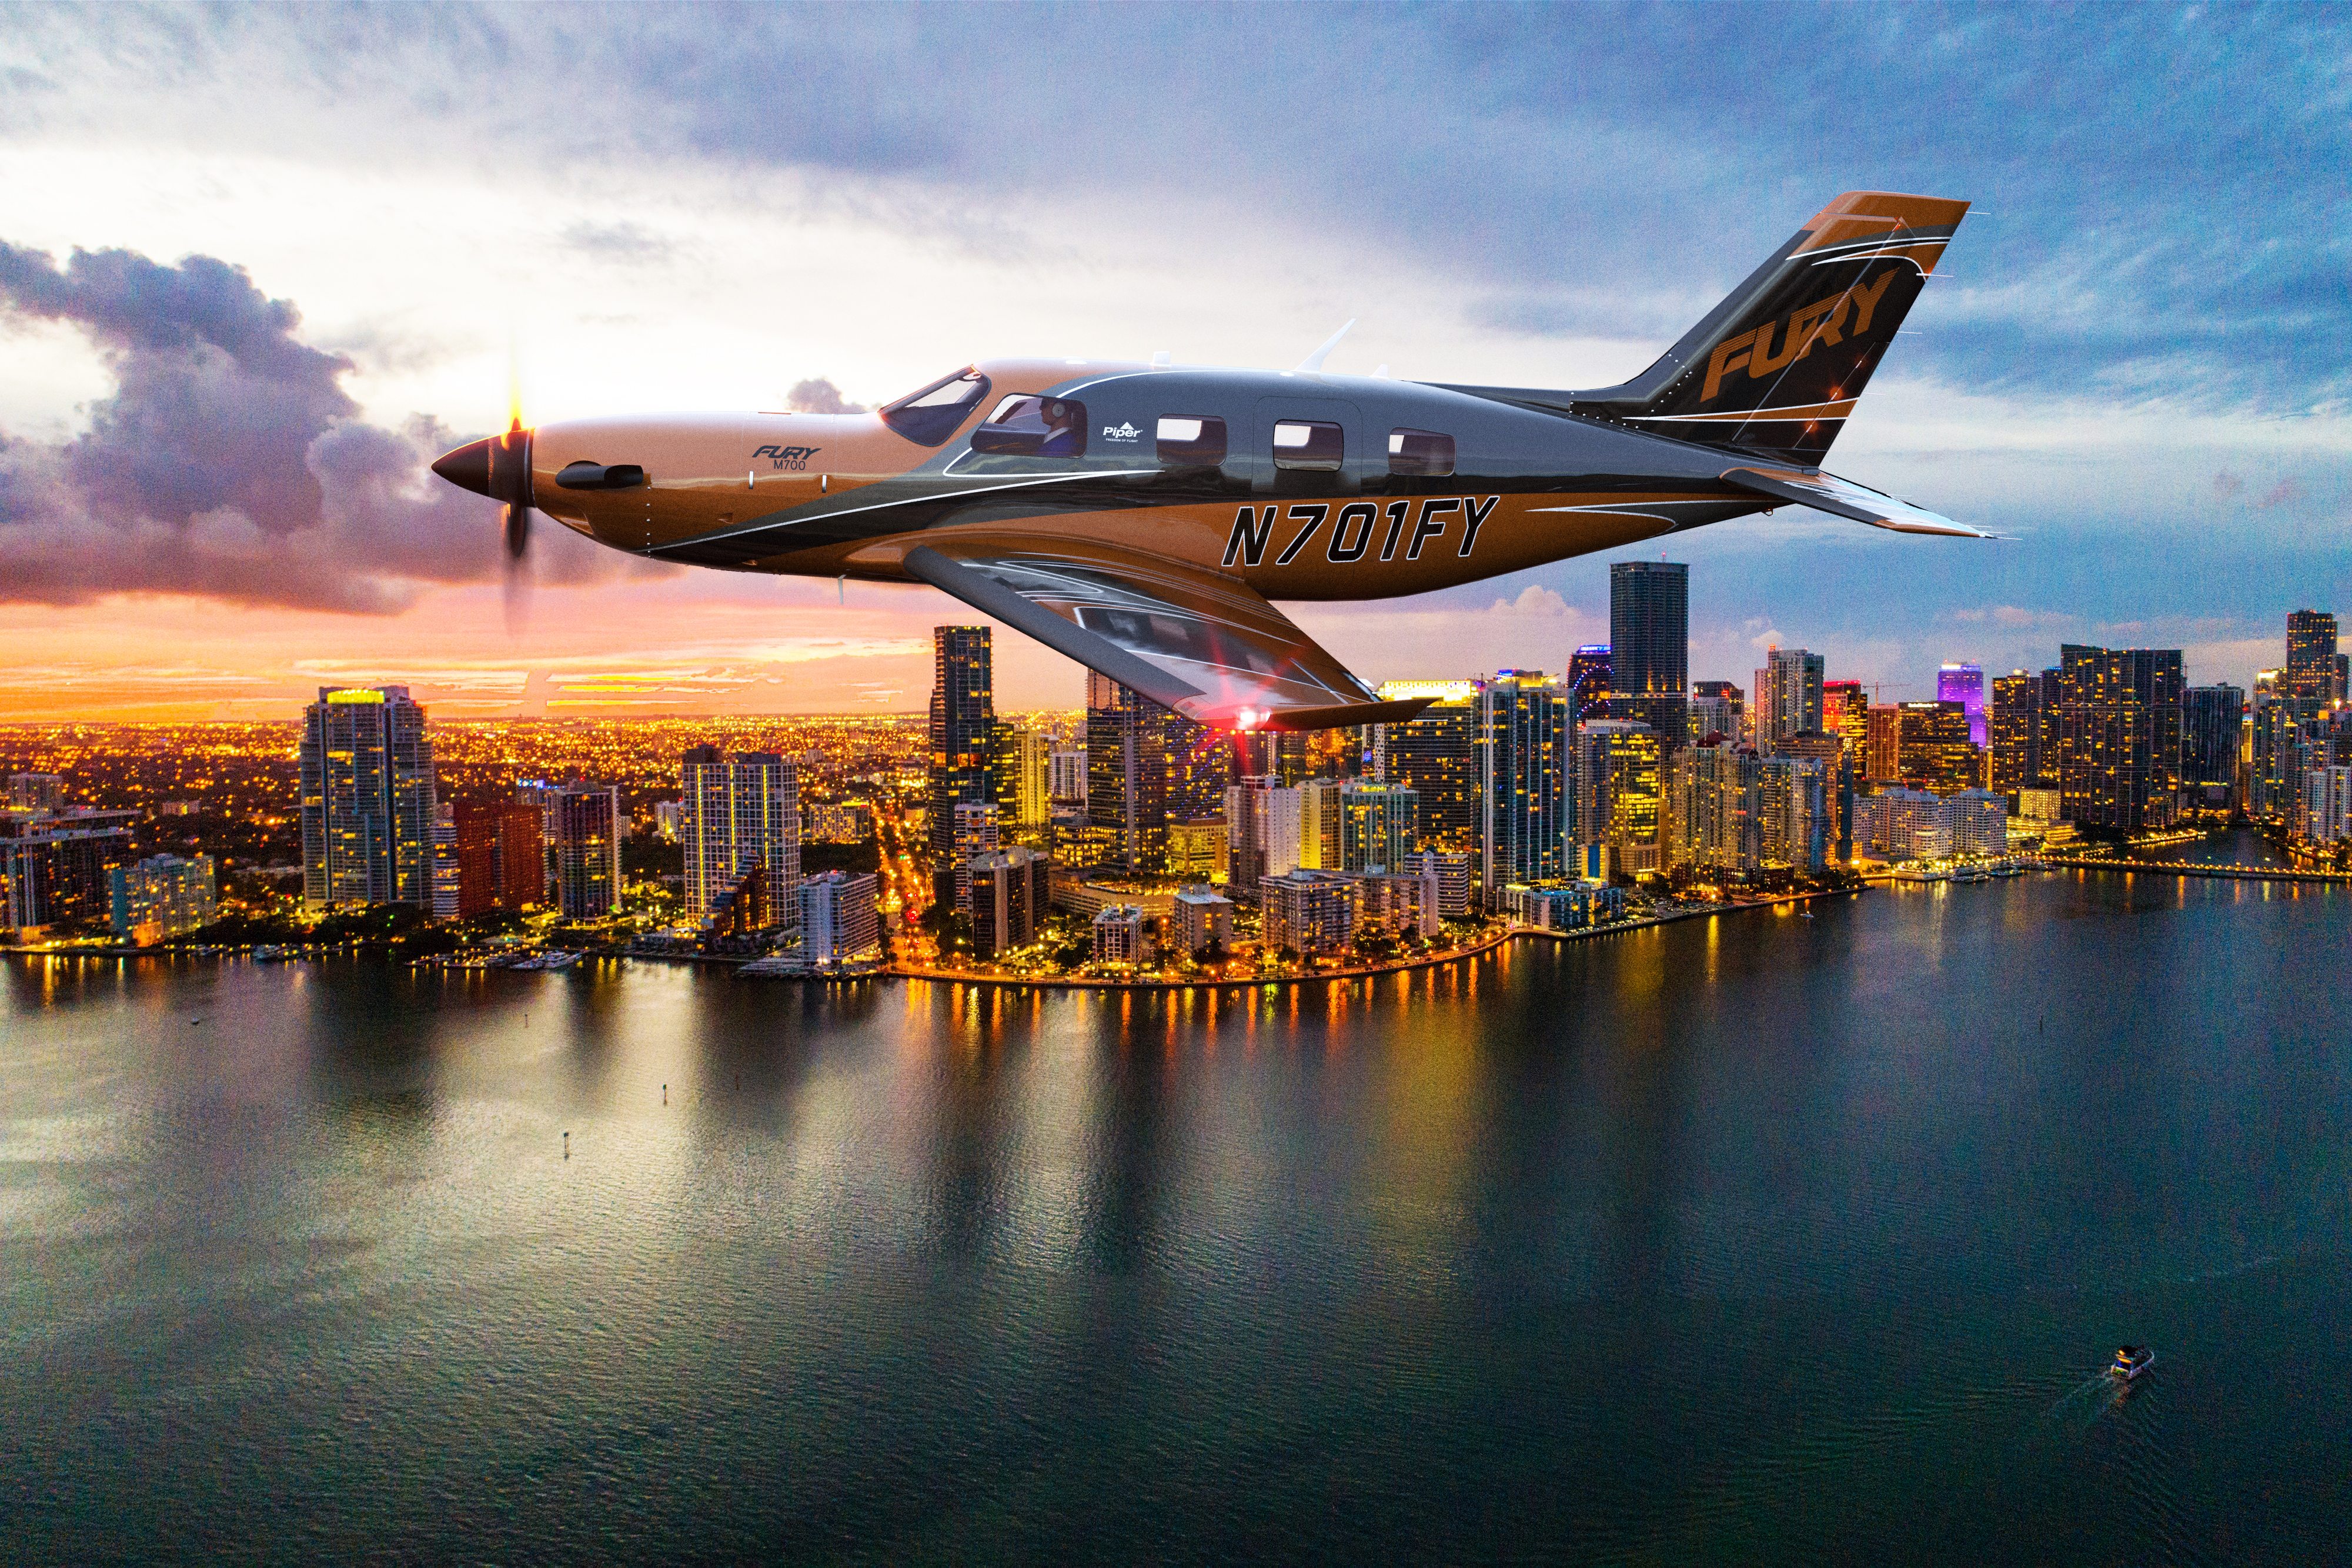 Image courtesy of Piper Aircraft.